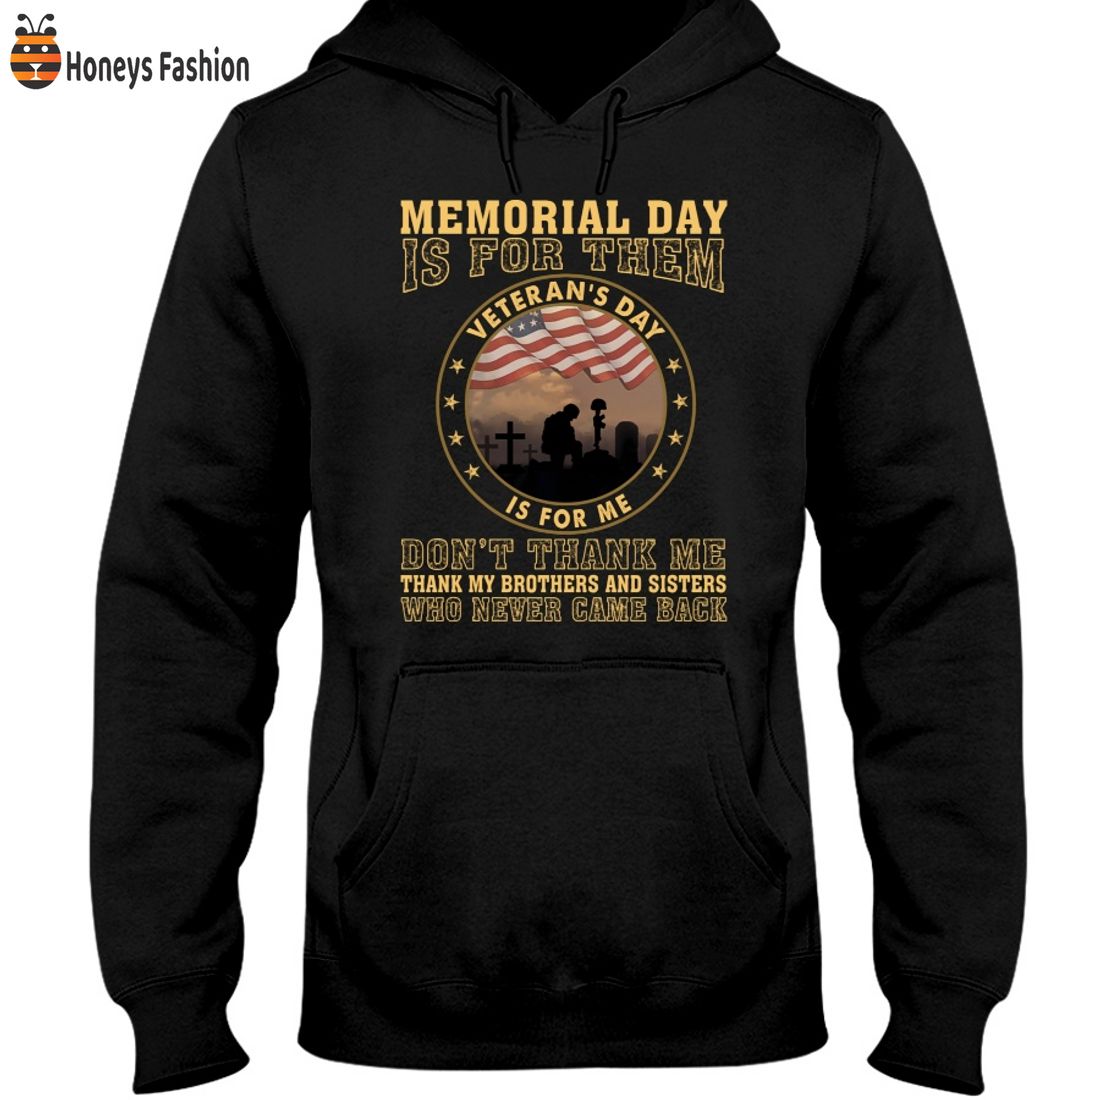 BEST SELLER Veteran’s Day Memorial Day Is For Them Is For Me Don’t Thank Me 2D Hoodie Tshirt